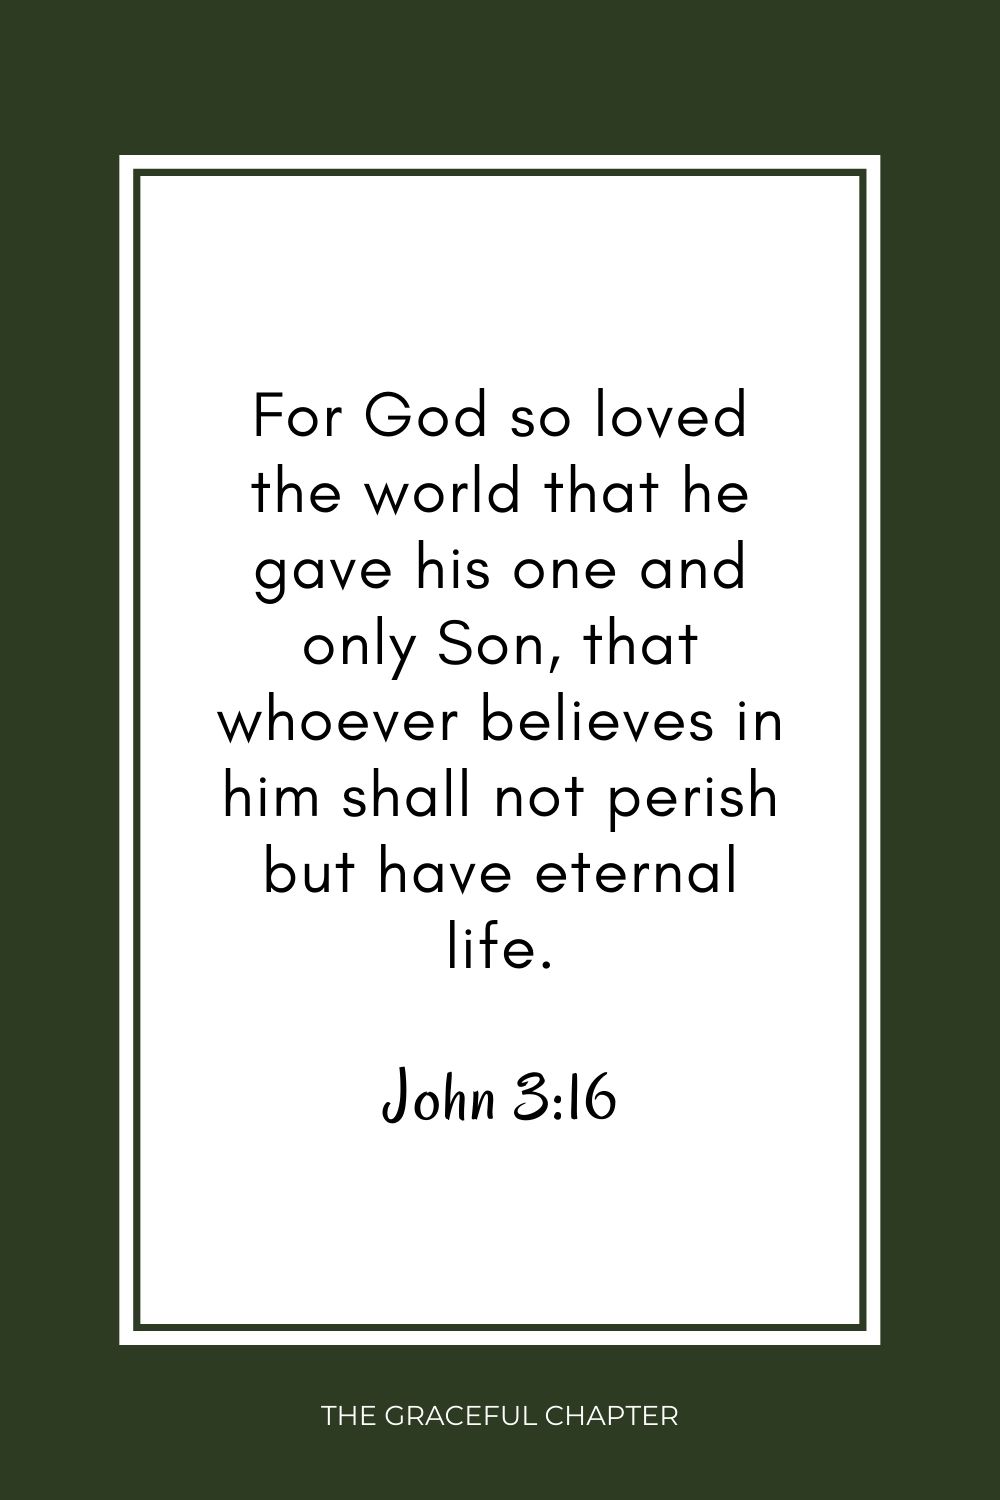 For God so loved the world that he gave his one and only Son, that whoever believes in him shall not perish but have eternal life. John 3:16